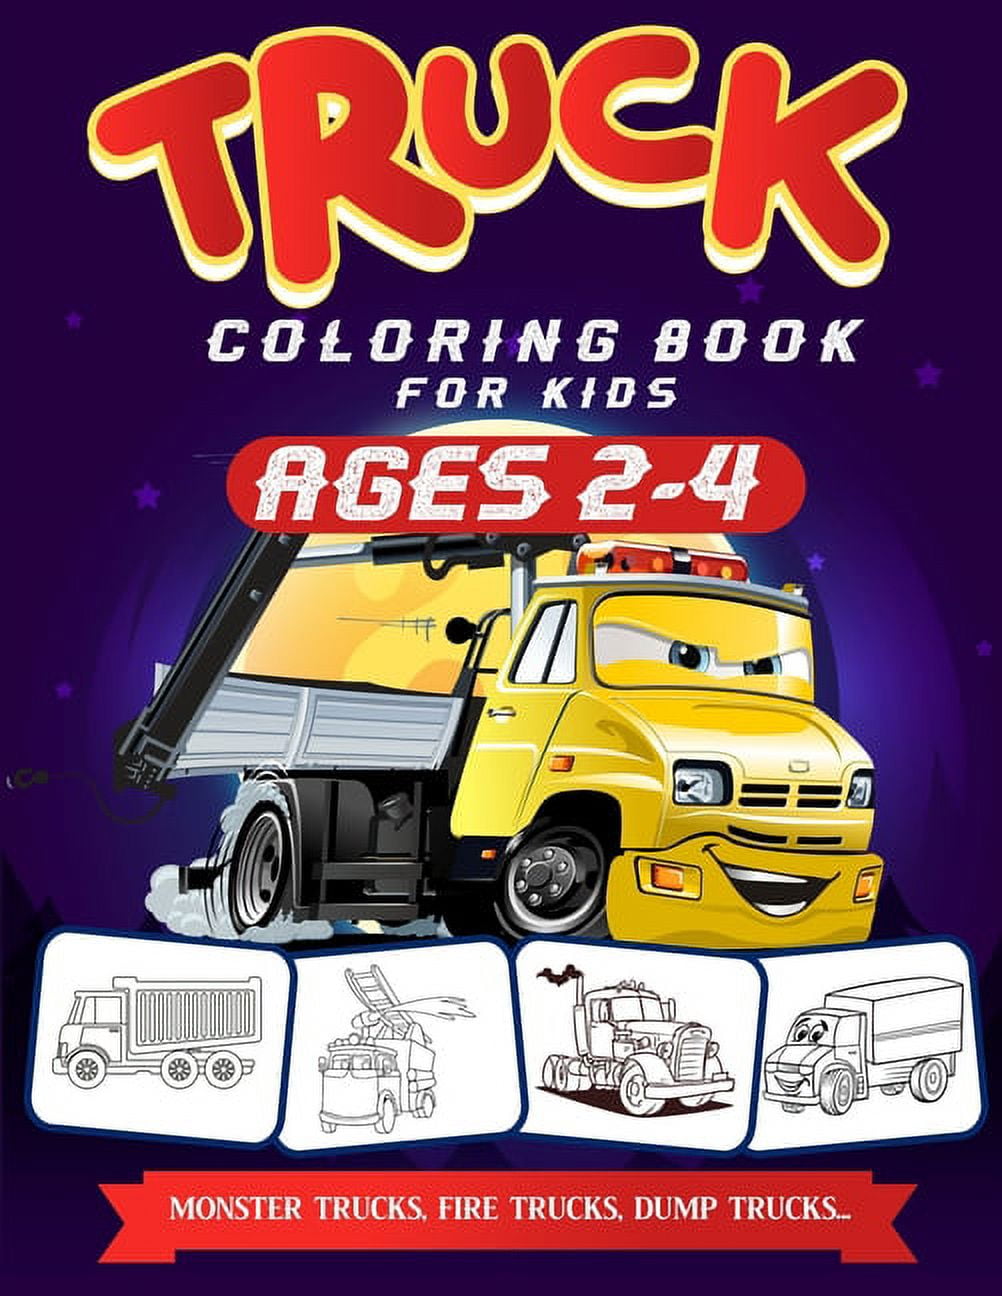 Space and Trucks Coloring Book for Kids ages 4-8: A Fun and